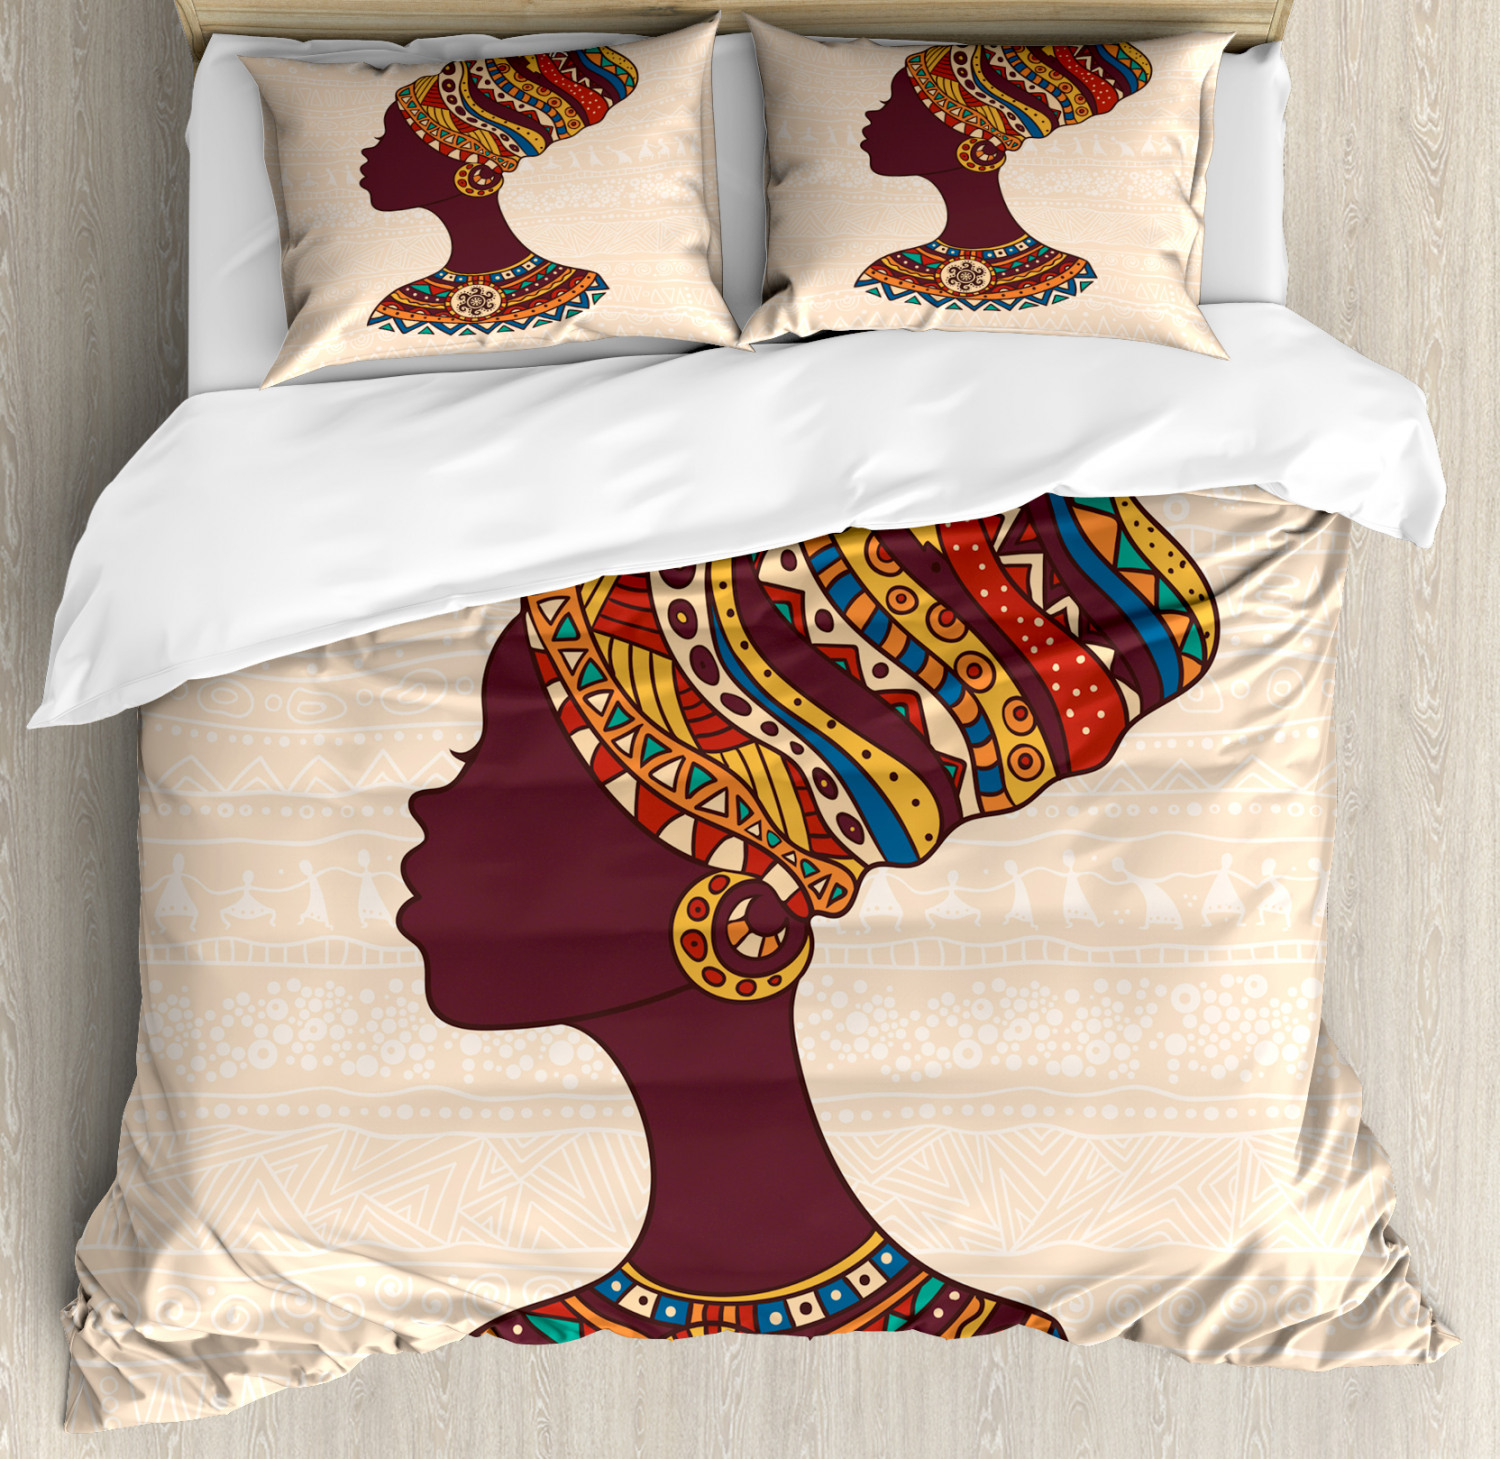 Tribal Duvet Cover Set With Pillow Shams African Ethnic Woman